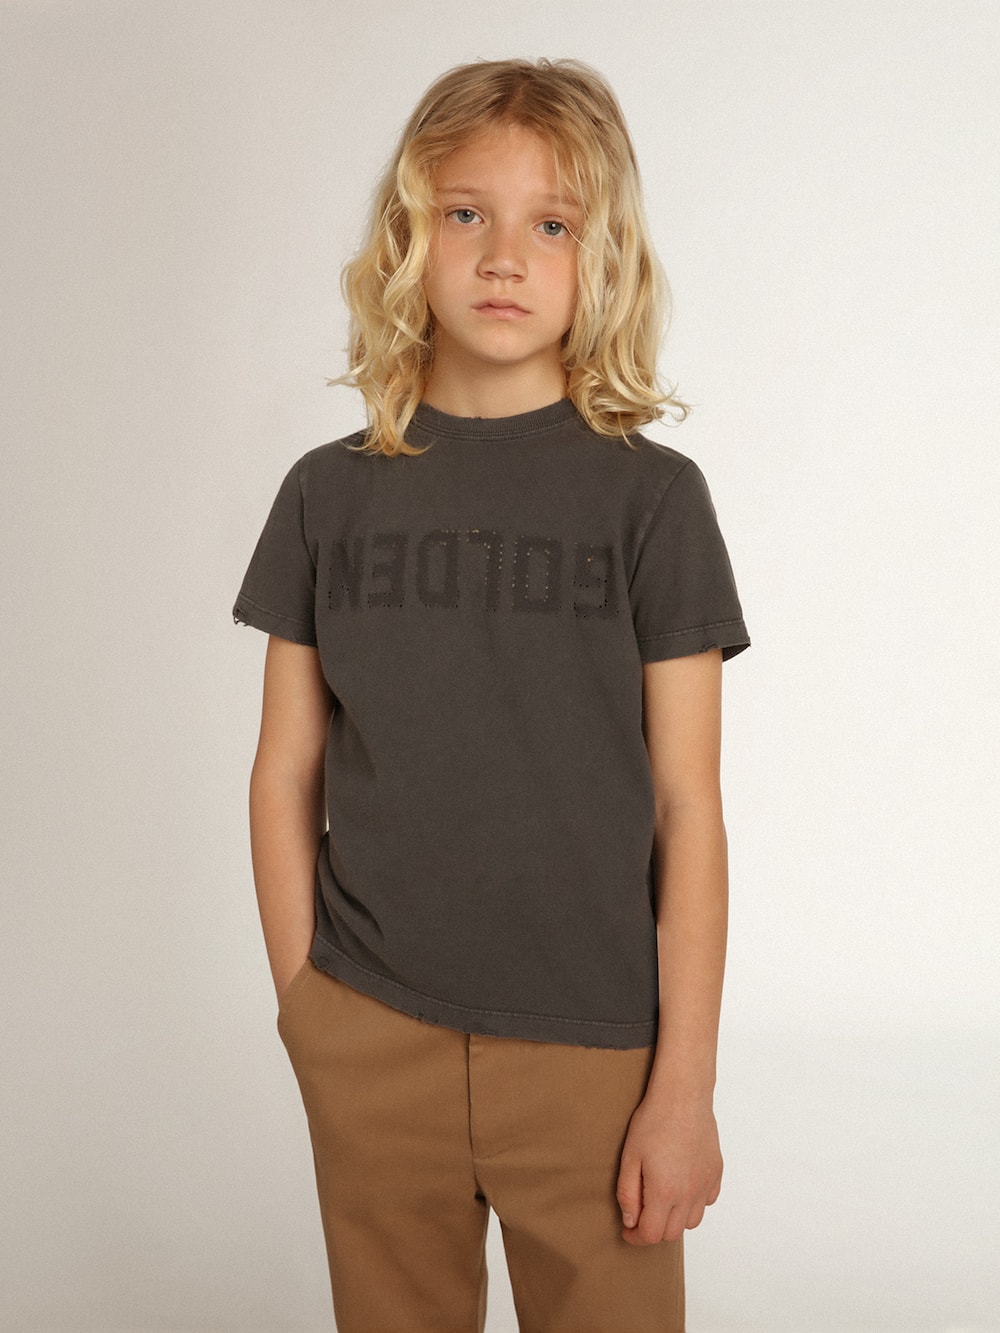 Golden Goose - Boys’ T-shirt in gray with distressed treatment in 